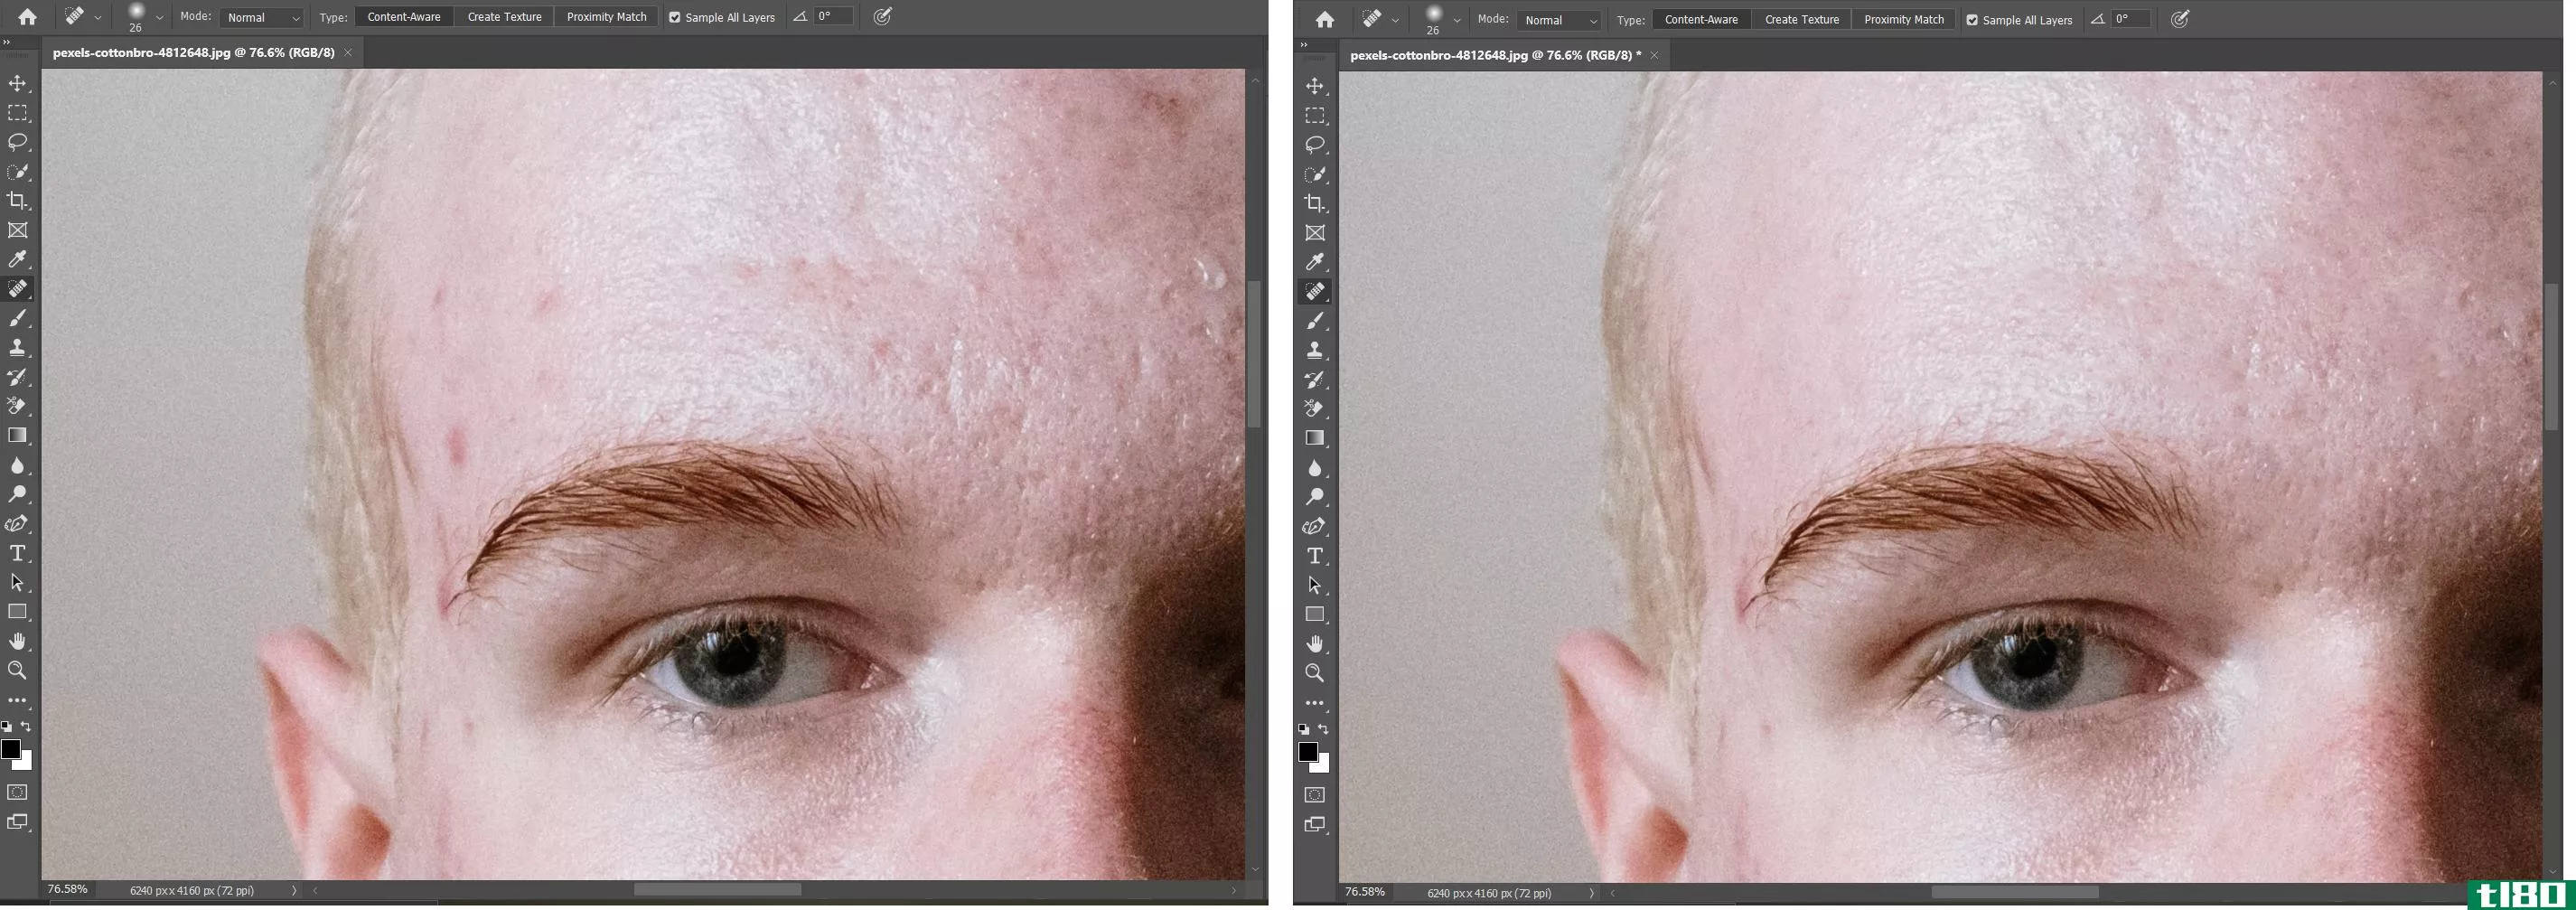 Photoshop screens of a man with and without spots